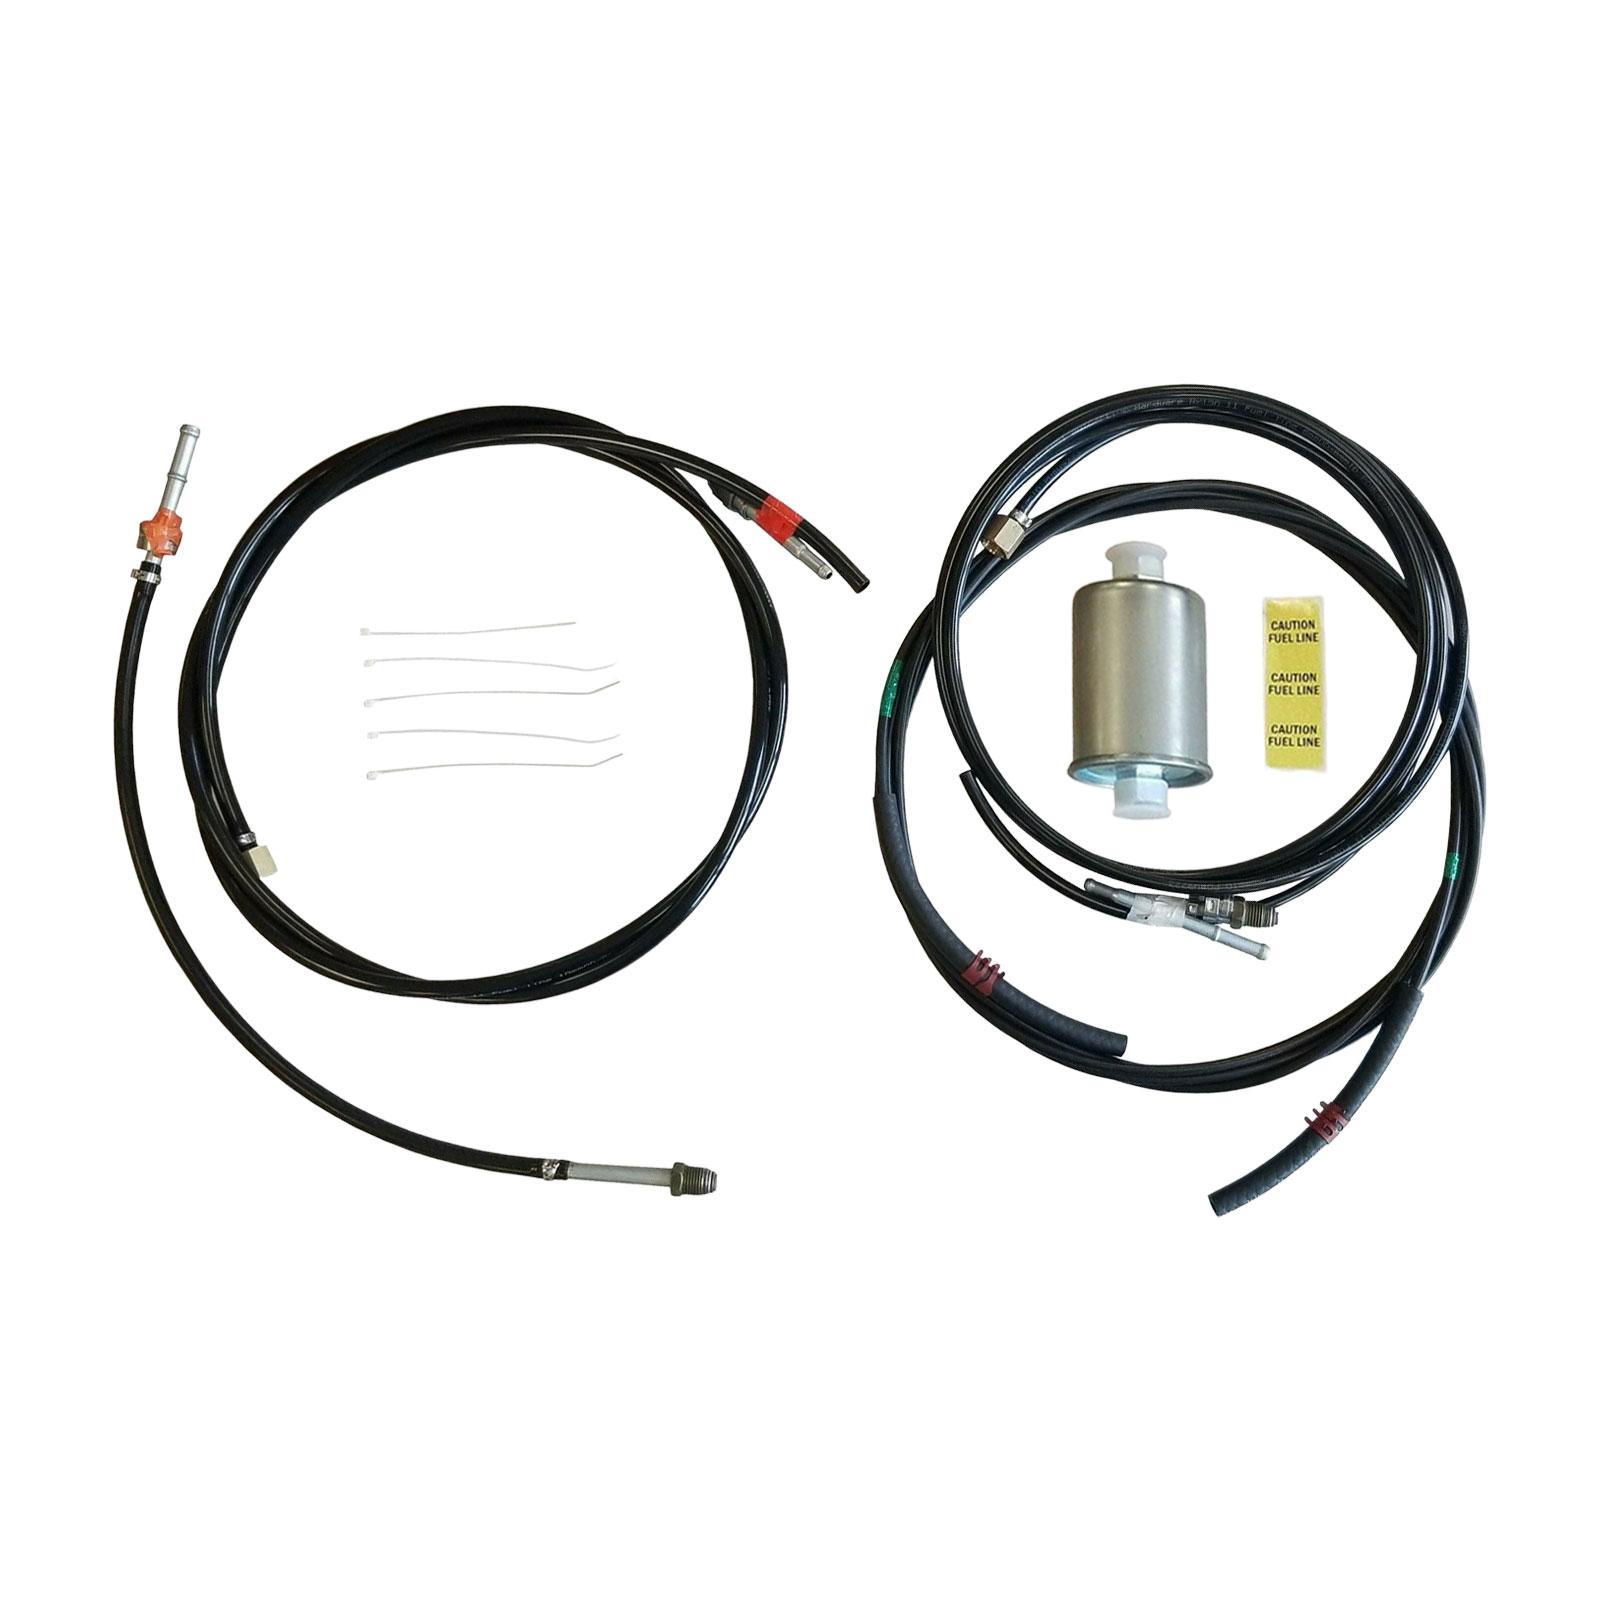 Fuel Line Kit Nfr0013 Durable Replacement Part for GMC High Performance